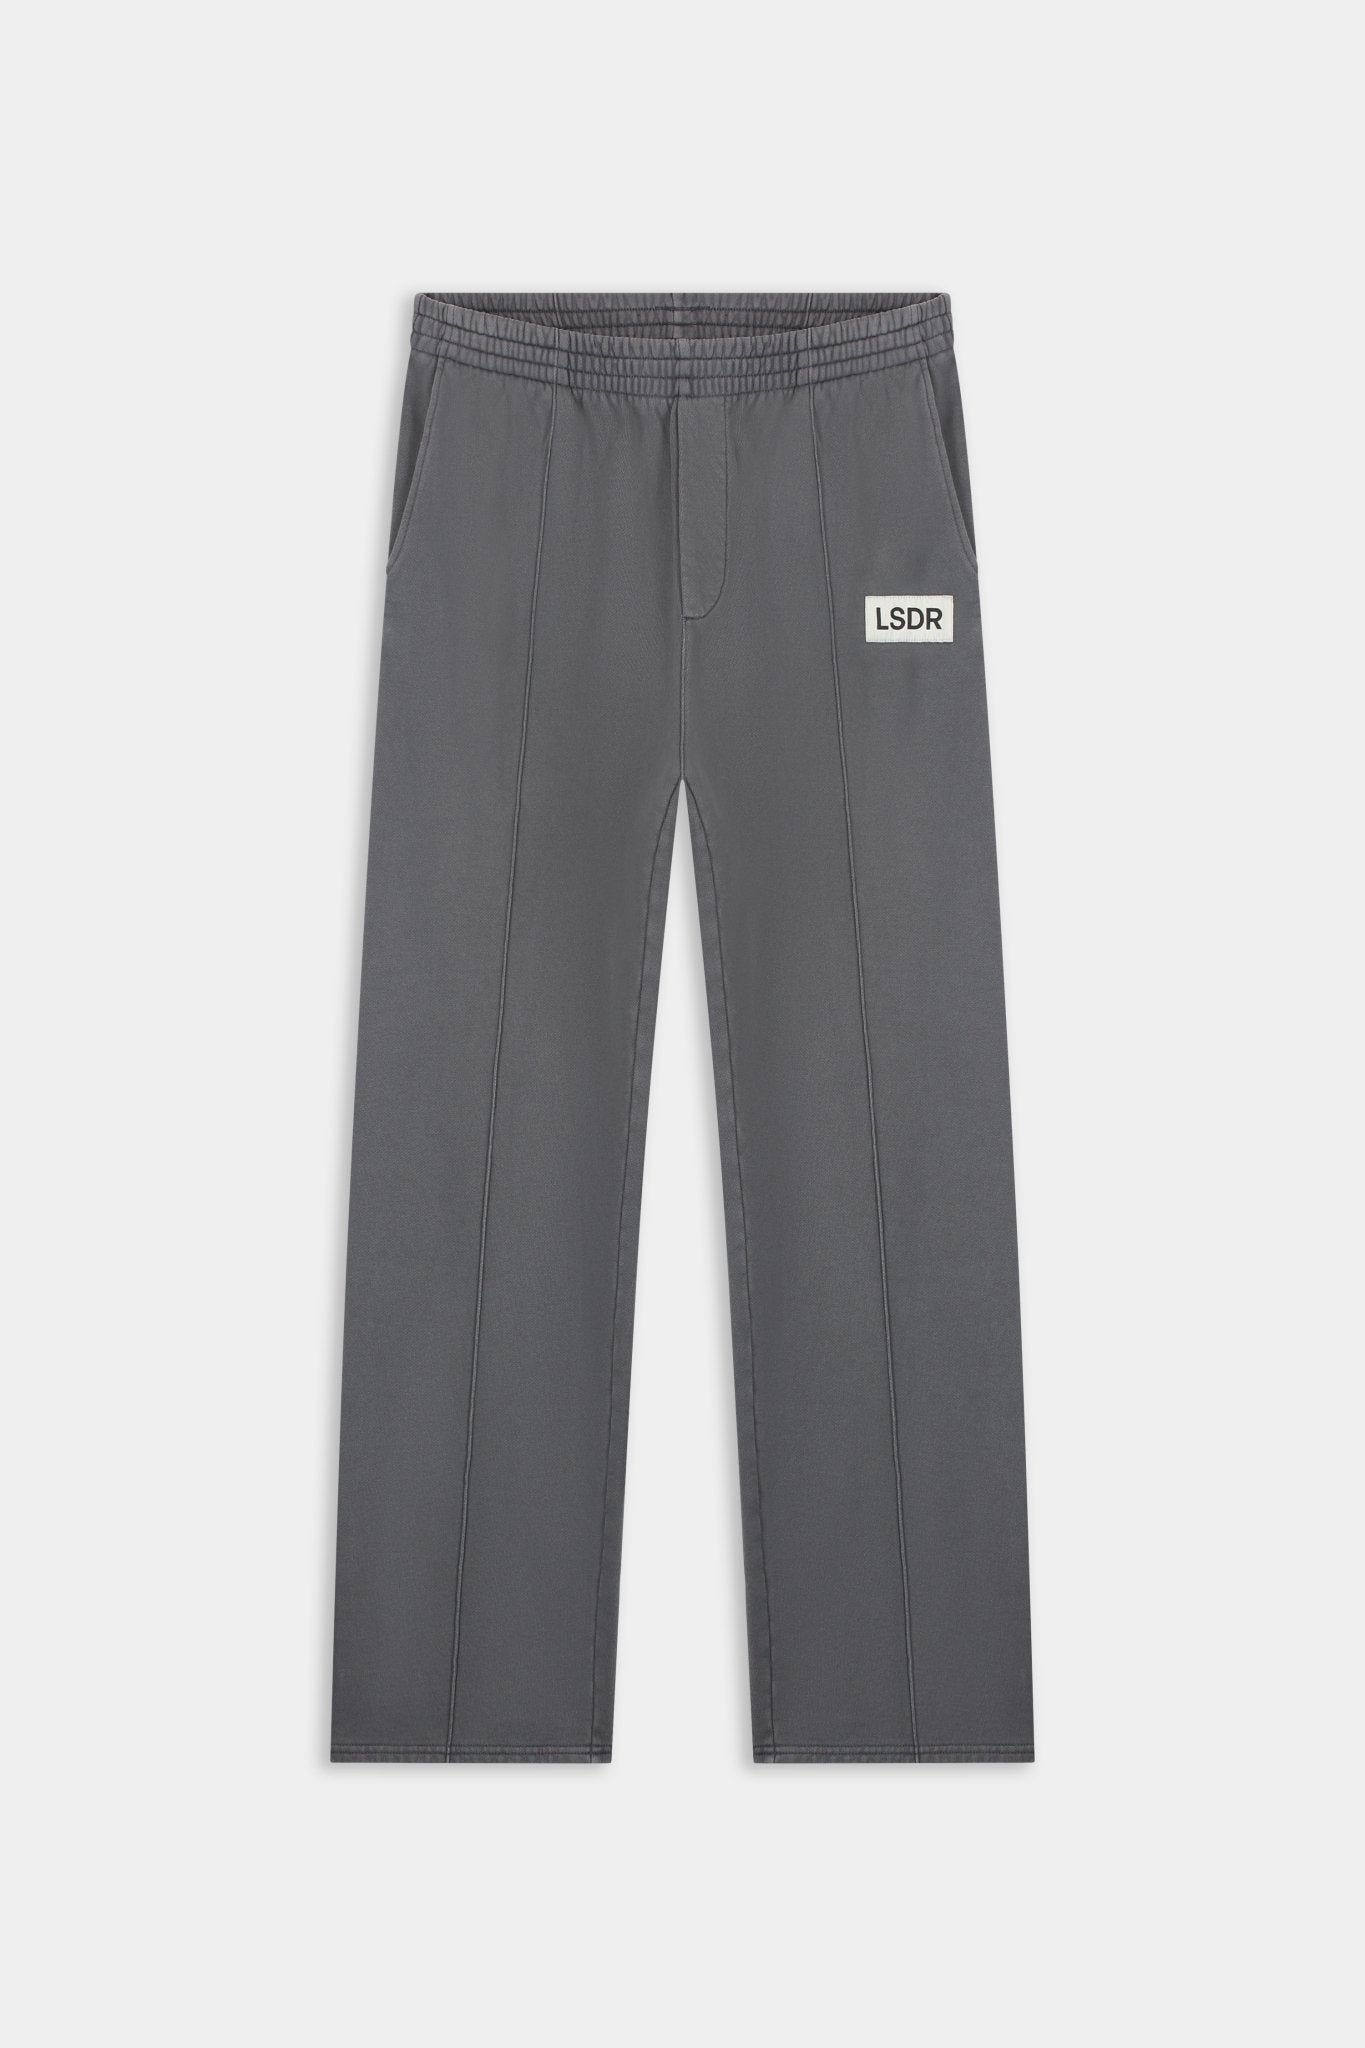 UDR TRACKPANTS - GRAY PINSTRIPE